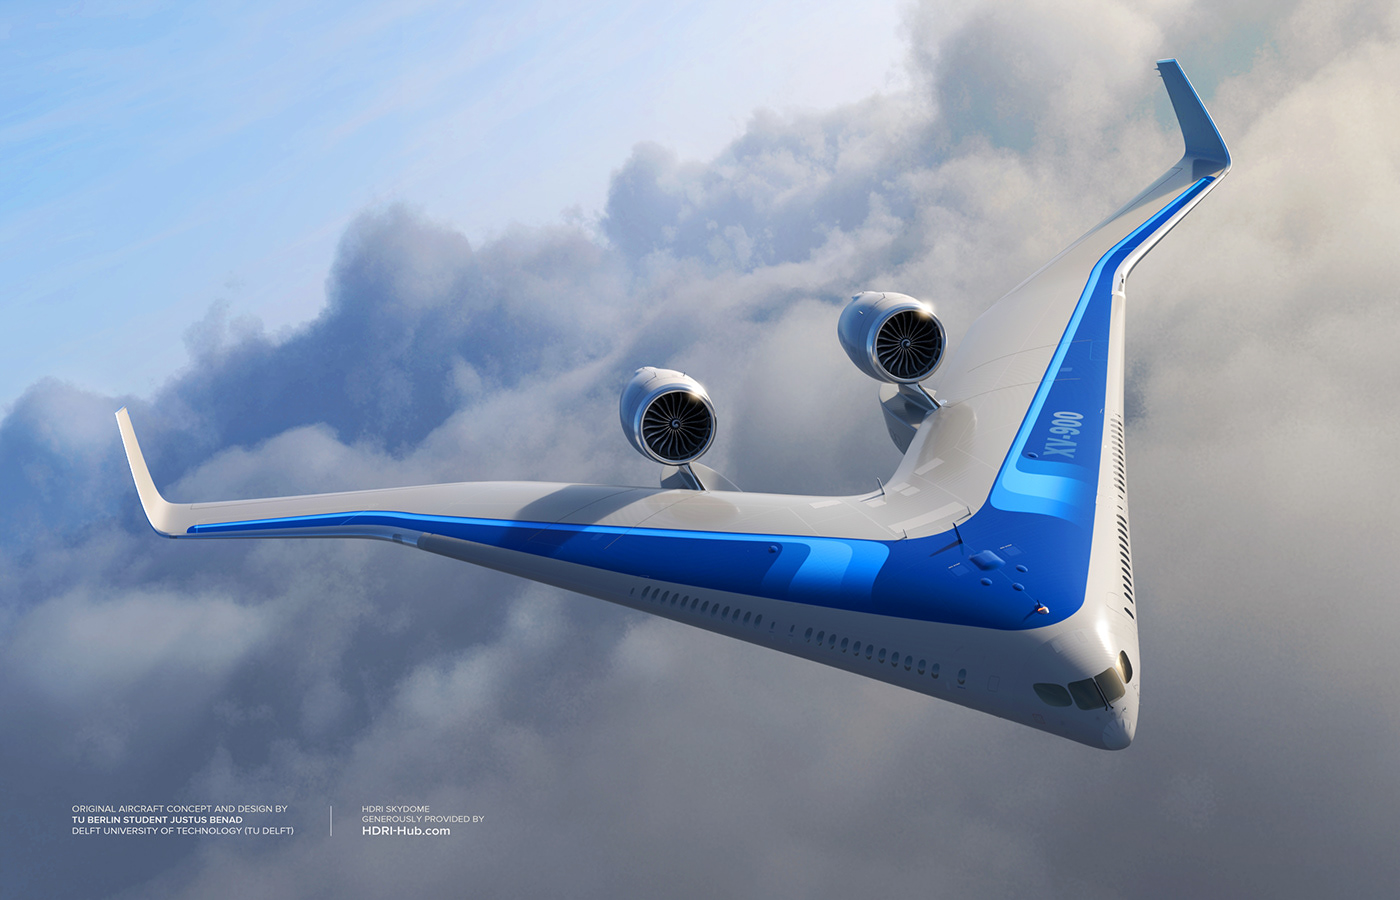 Concept flying wing passenger aircraft soars high over the clouds at sunset.